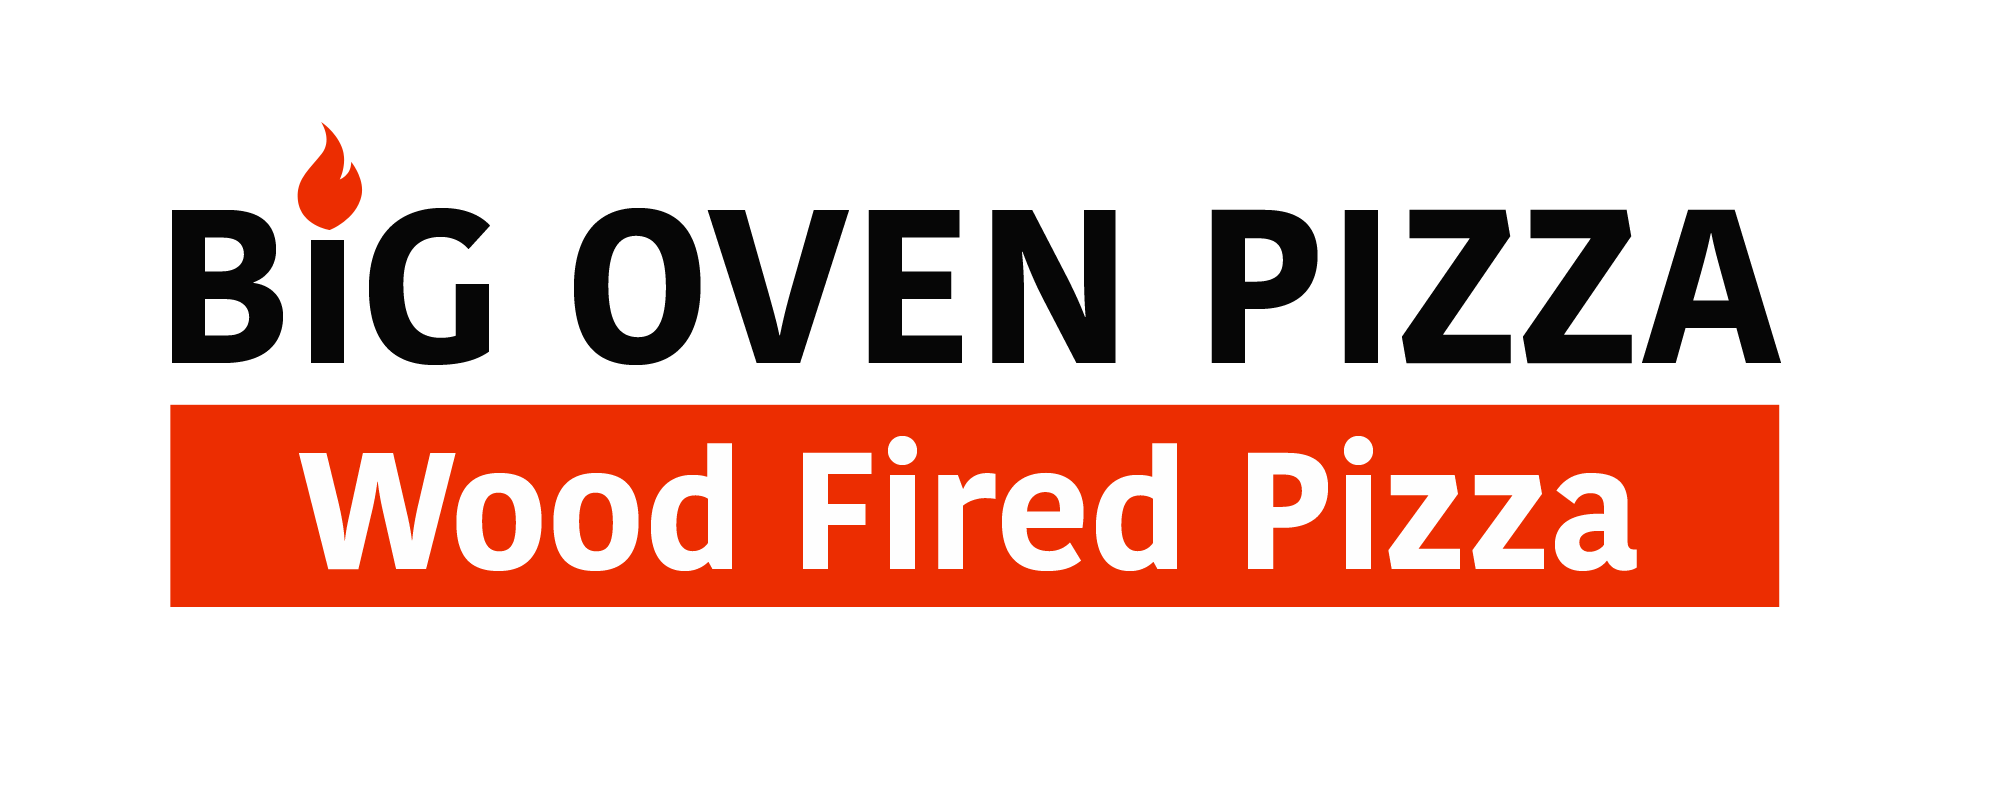 Wood Fired Pizza Truck Catering | San Diego, CA | Big Oven Pizza